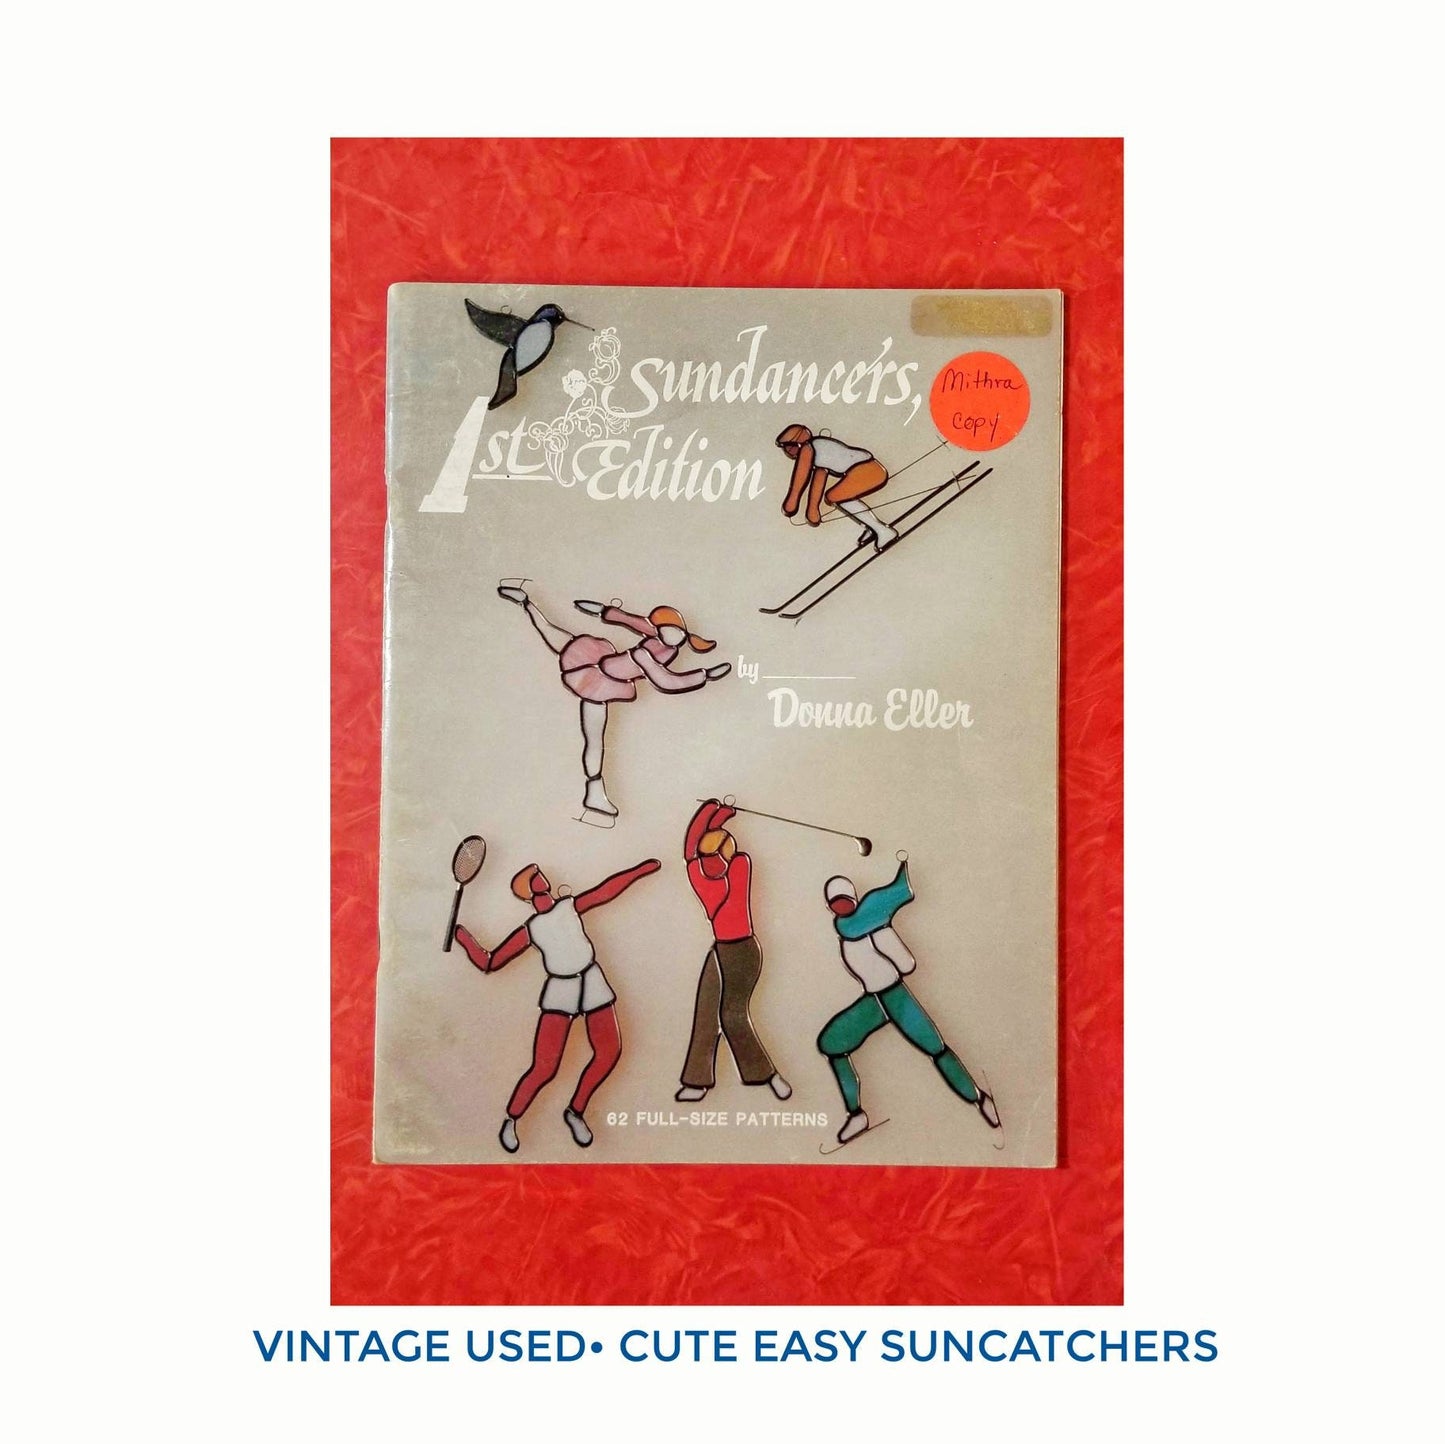 Stained Glass Book for Suncatcher Designs. Vintage Used, Fair/Good Condition, 62 Full Size Glass Patterns. Sundancers, by author Donna Eller